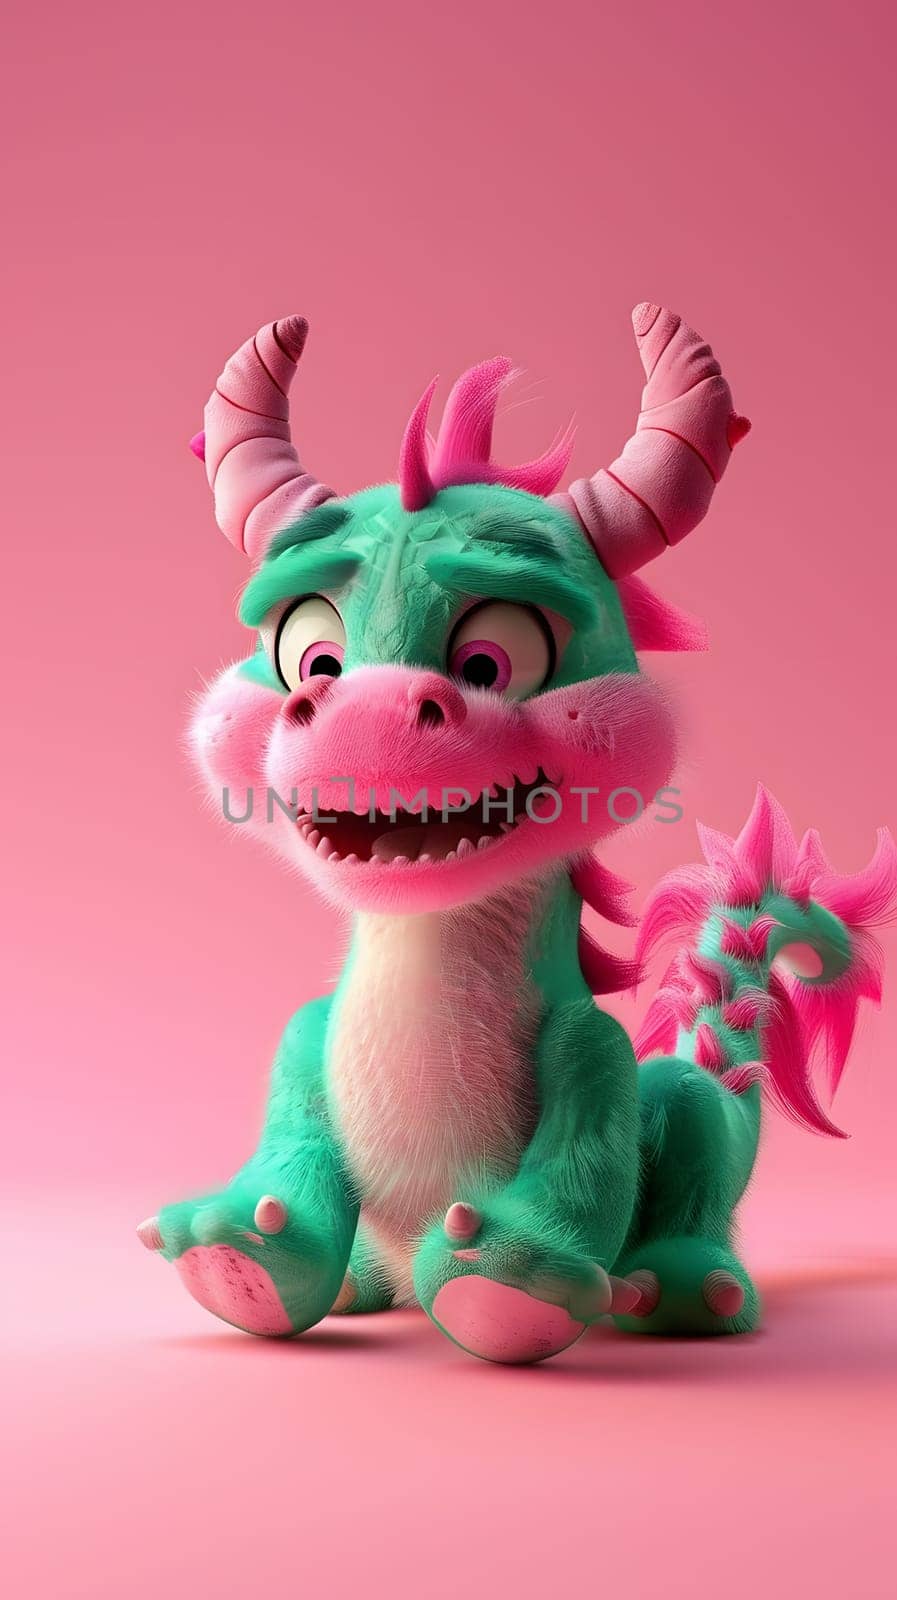 Happy green plush dragon toy with horns, sitting on magenta surface by Nadtochiy